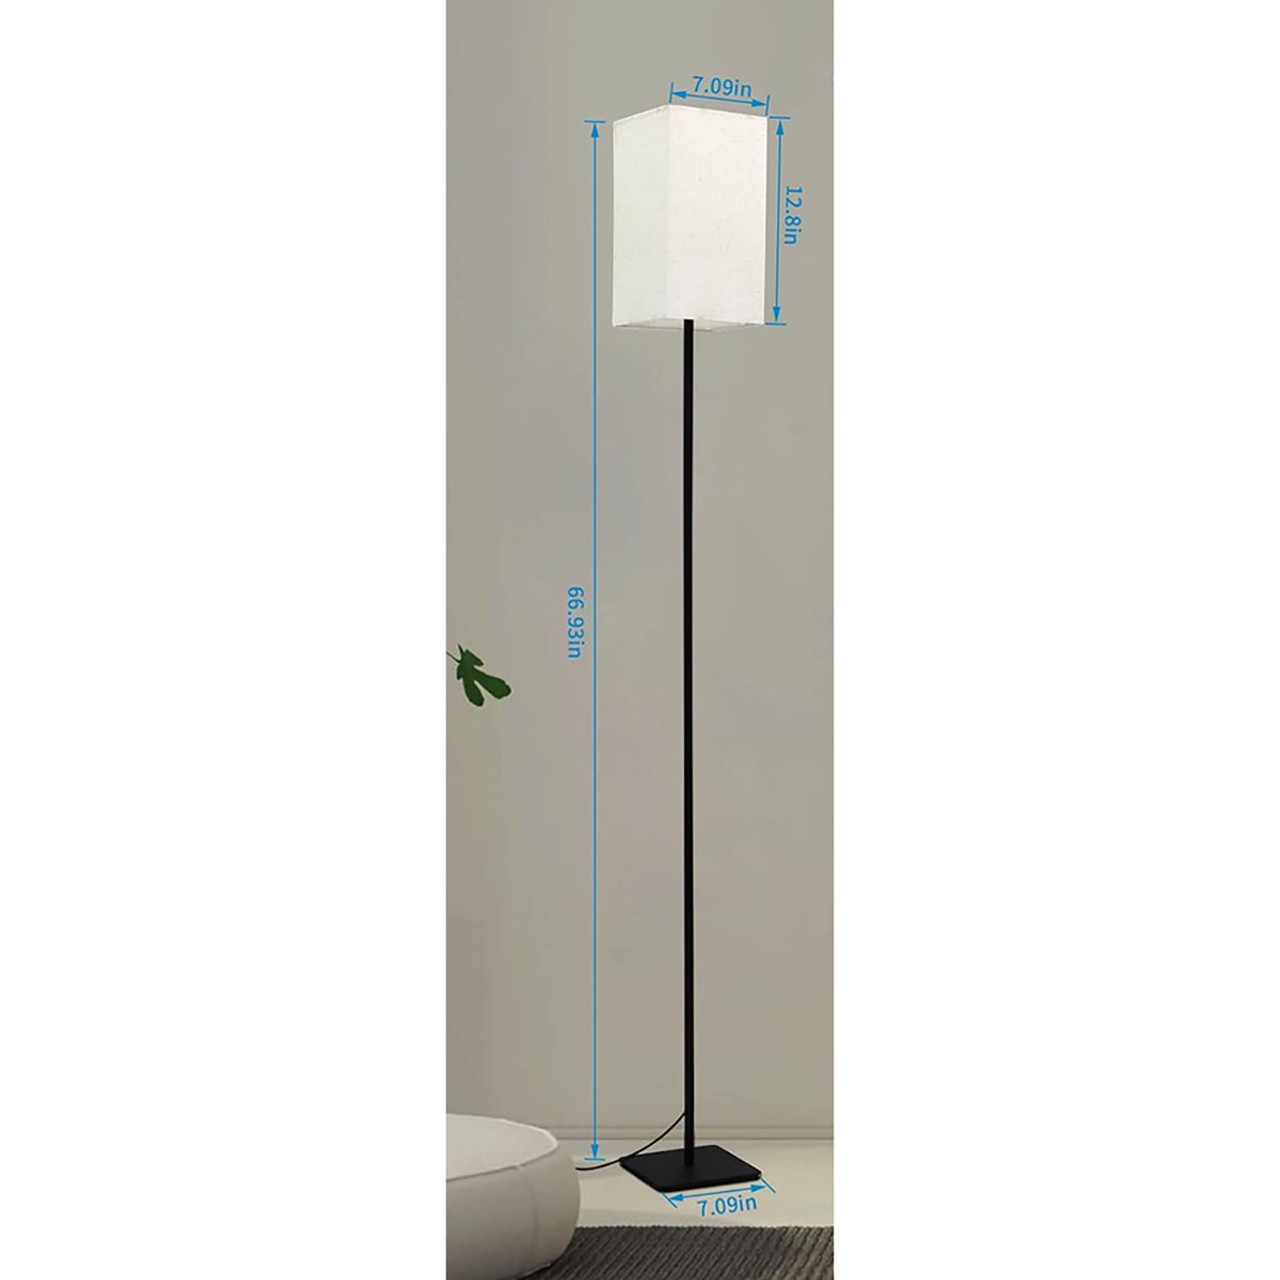 RGB LED Standing Floor Lamp product image